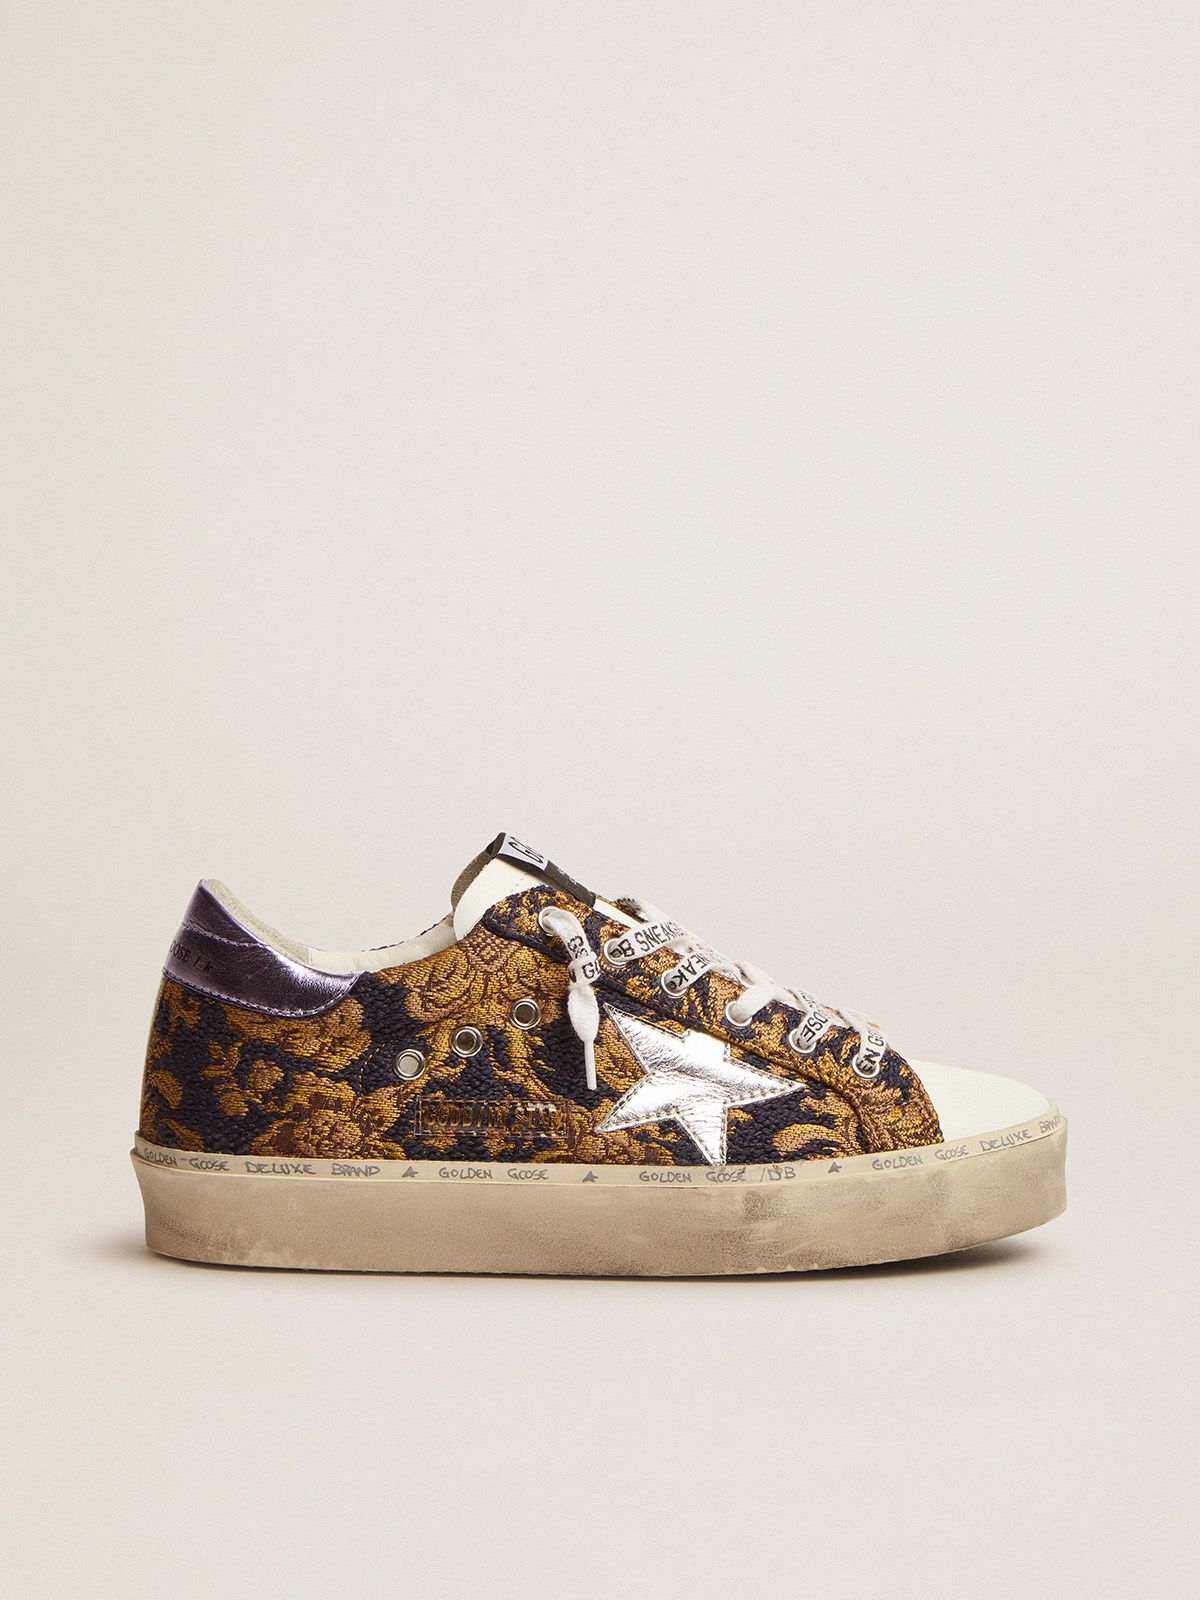 golden goose laminated sneakers detail Star brocade in Hi with jacquard